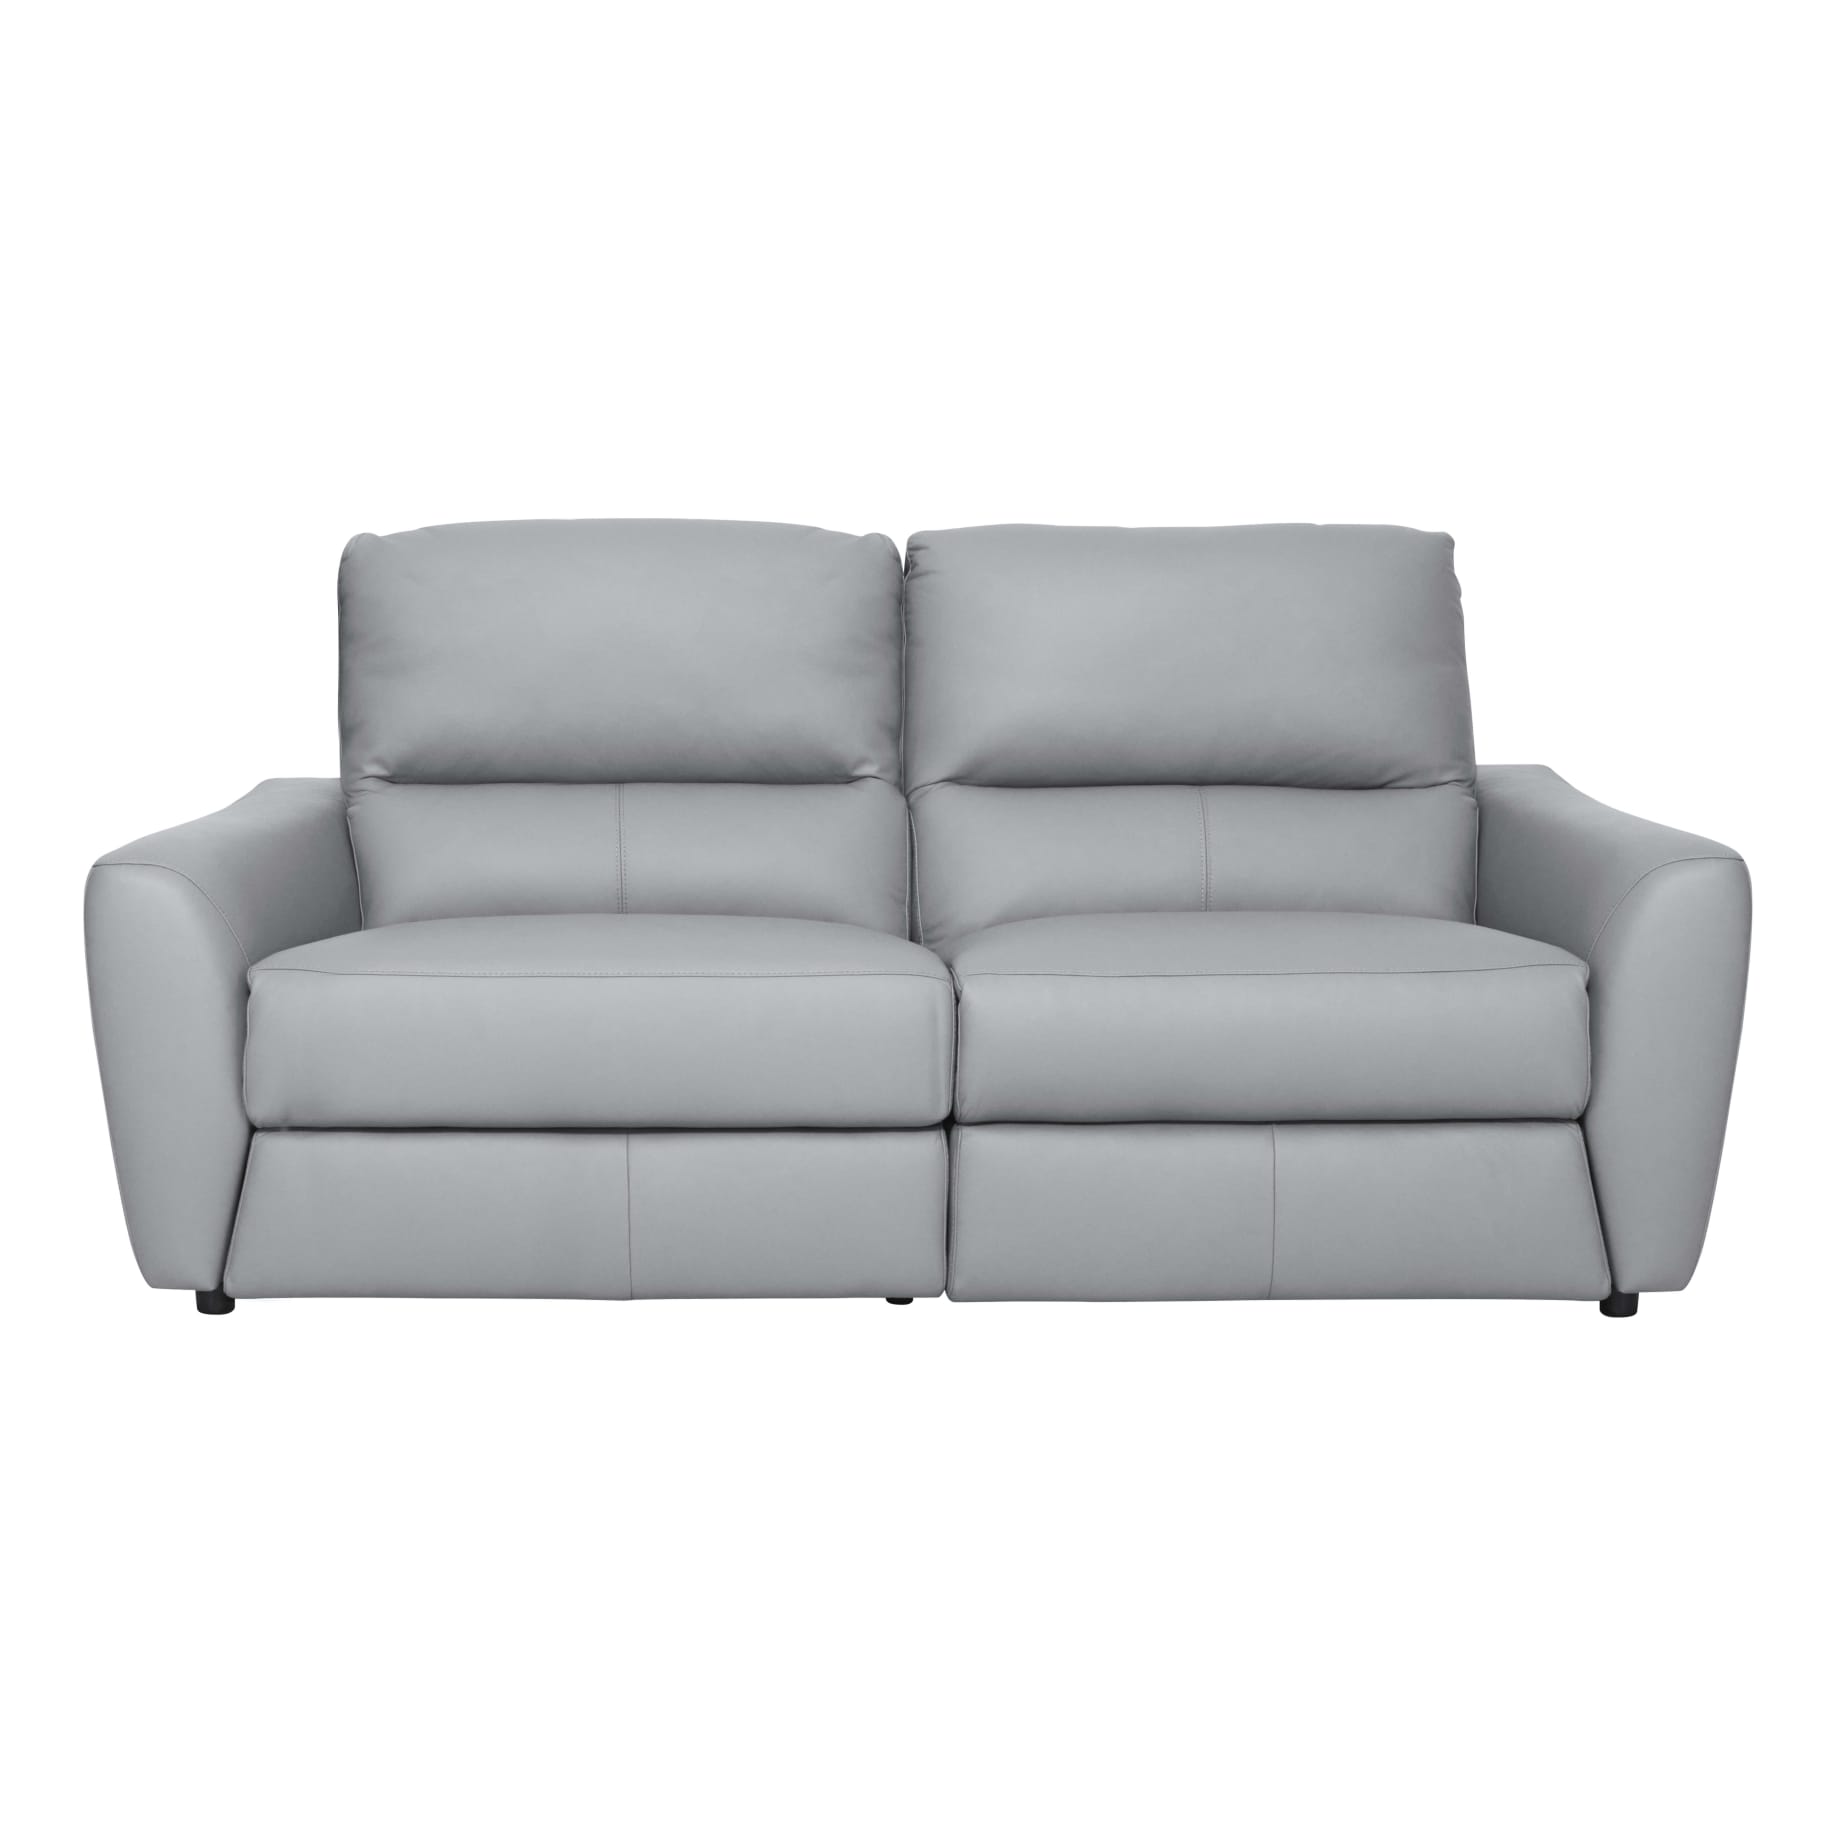 Portland 2 Seater Recliner in Leather Pewter